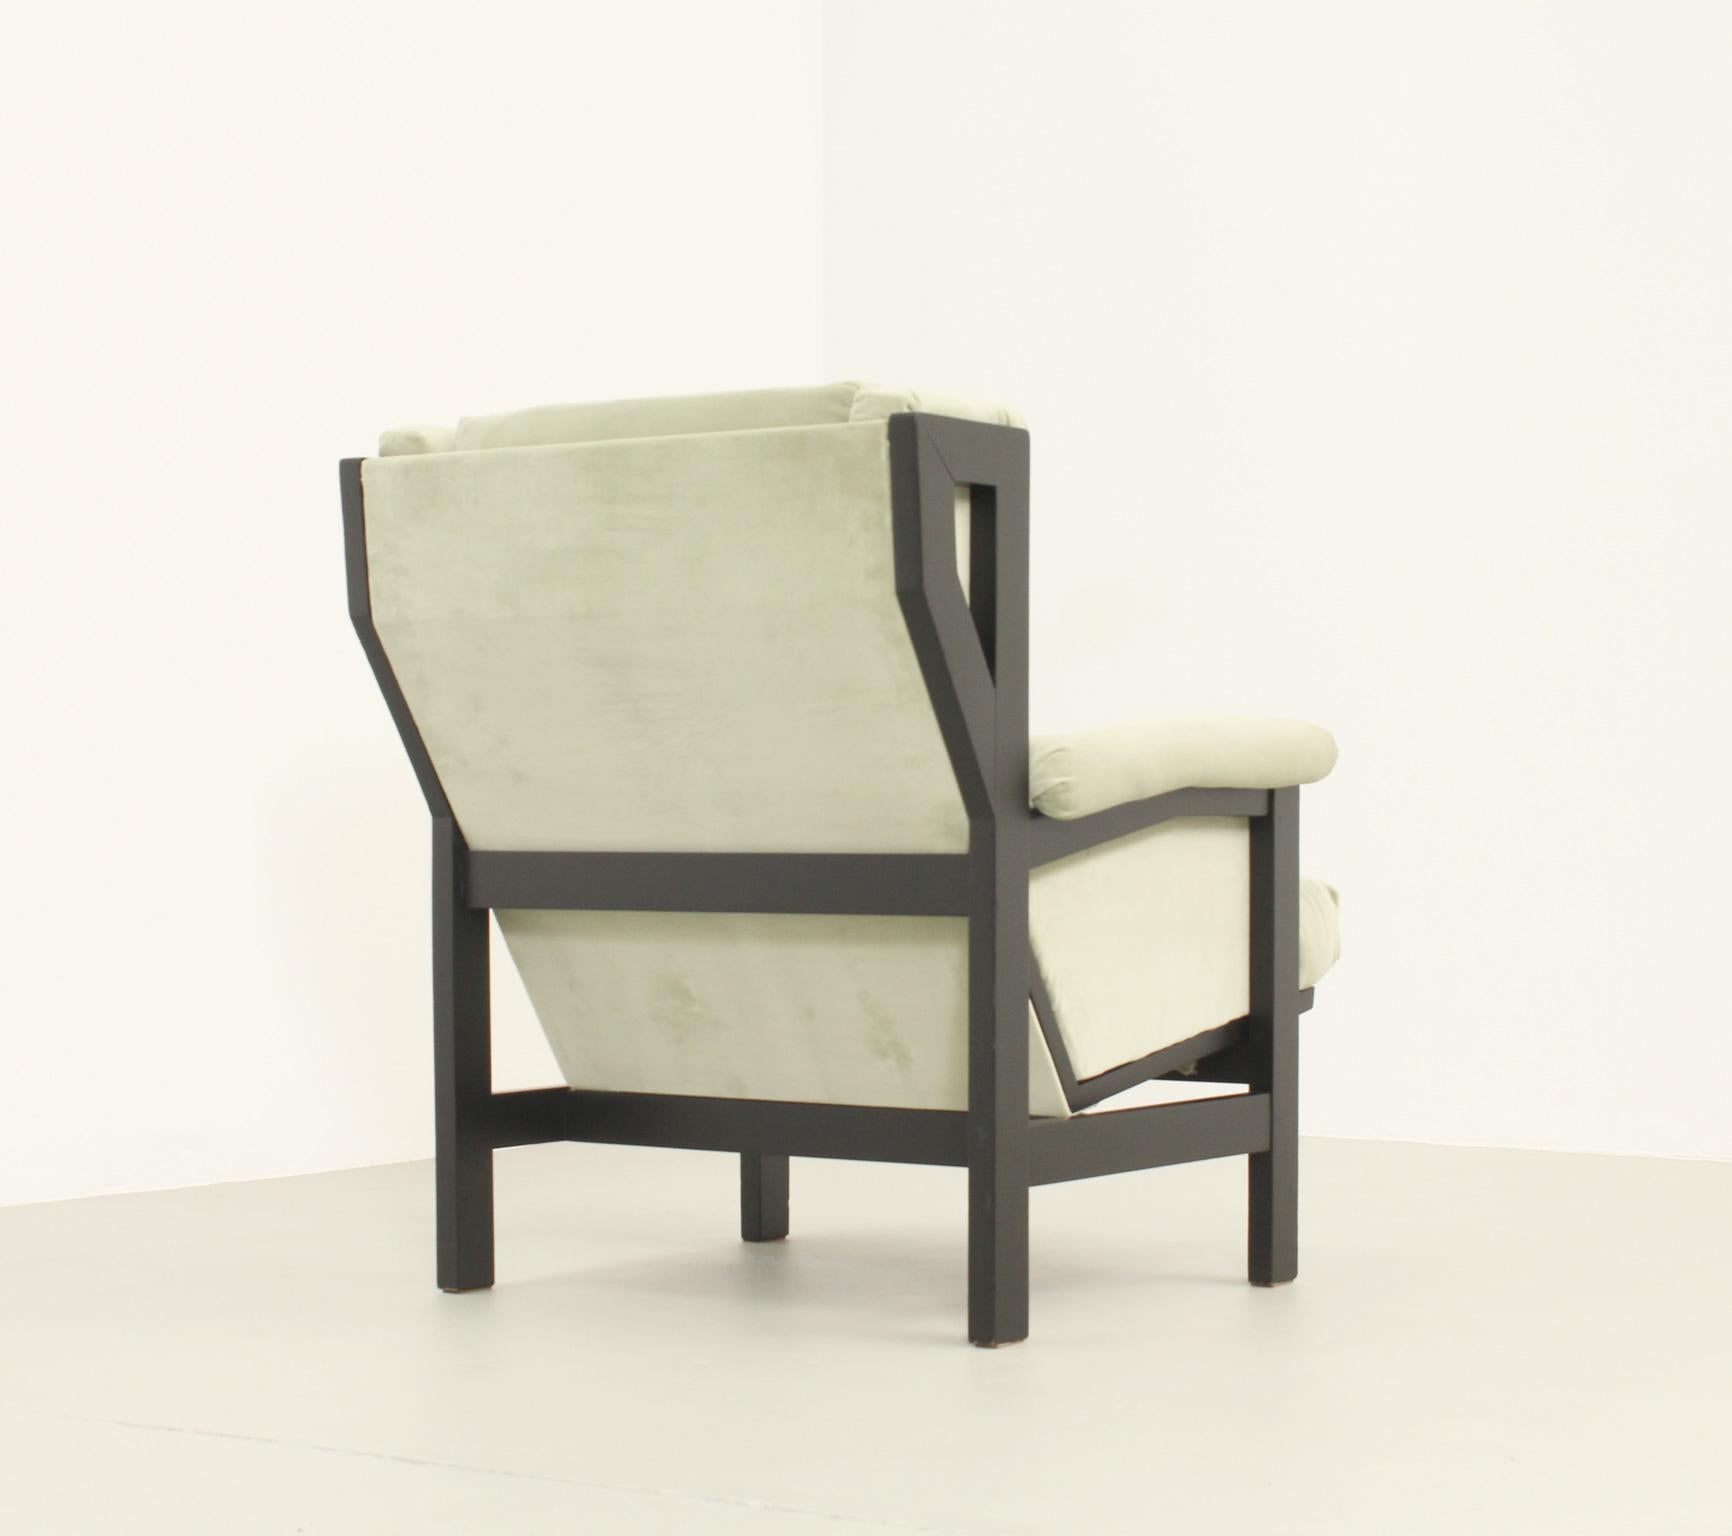 San Remo Armchair By Rafael Carreras, Spain, 1959 For Sale 5